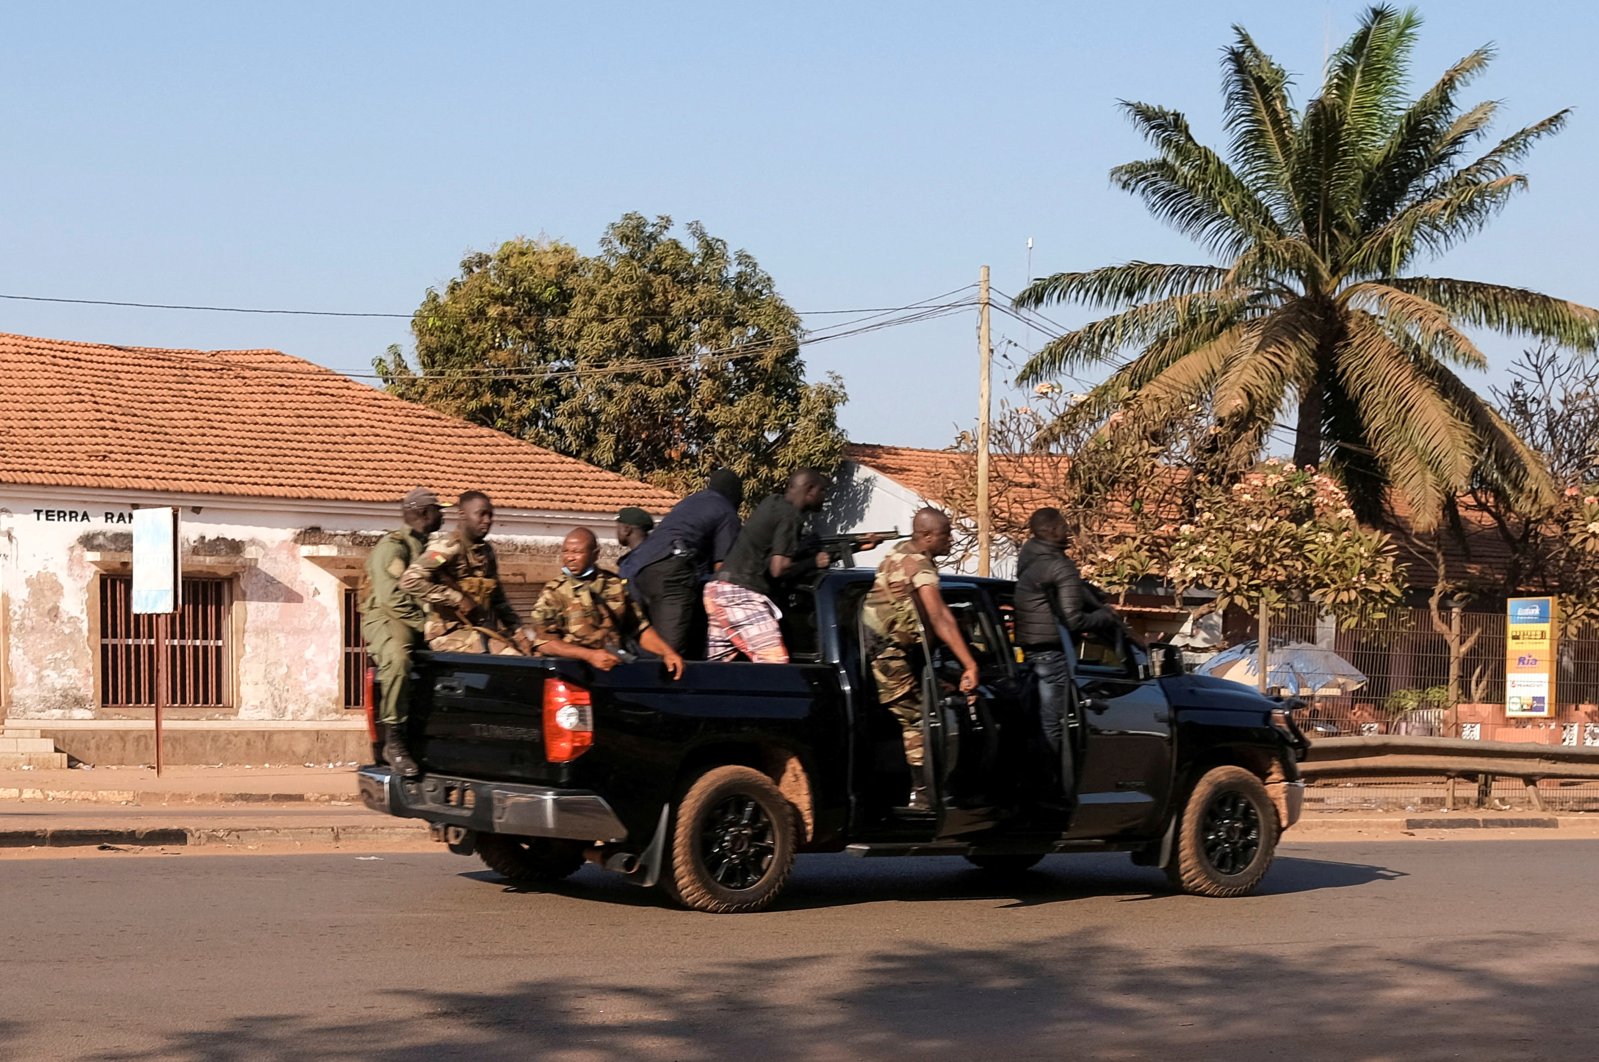 Armed soldiers move on the main artery of the capital after heavy gunfire around the presidential palace in Bissau, Guinea-Bissau Feb. 1, 2022. (Reuters Photo)